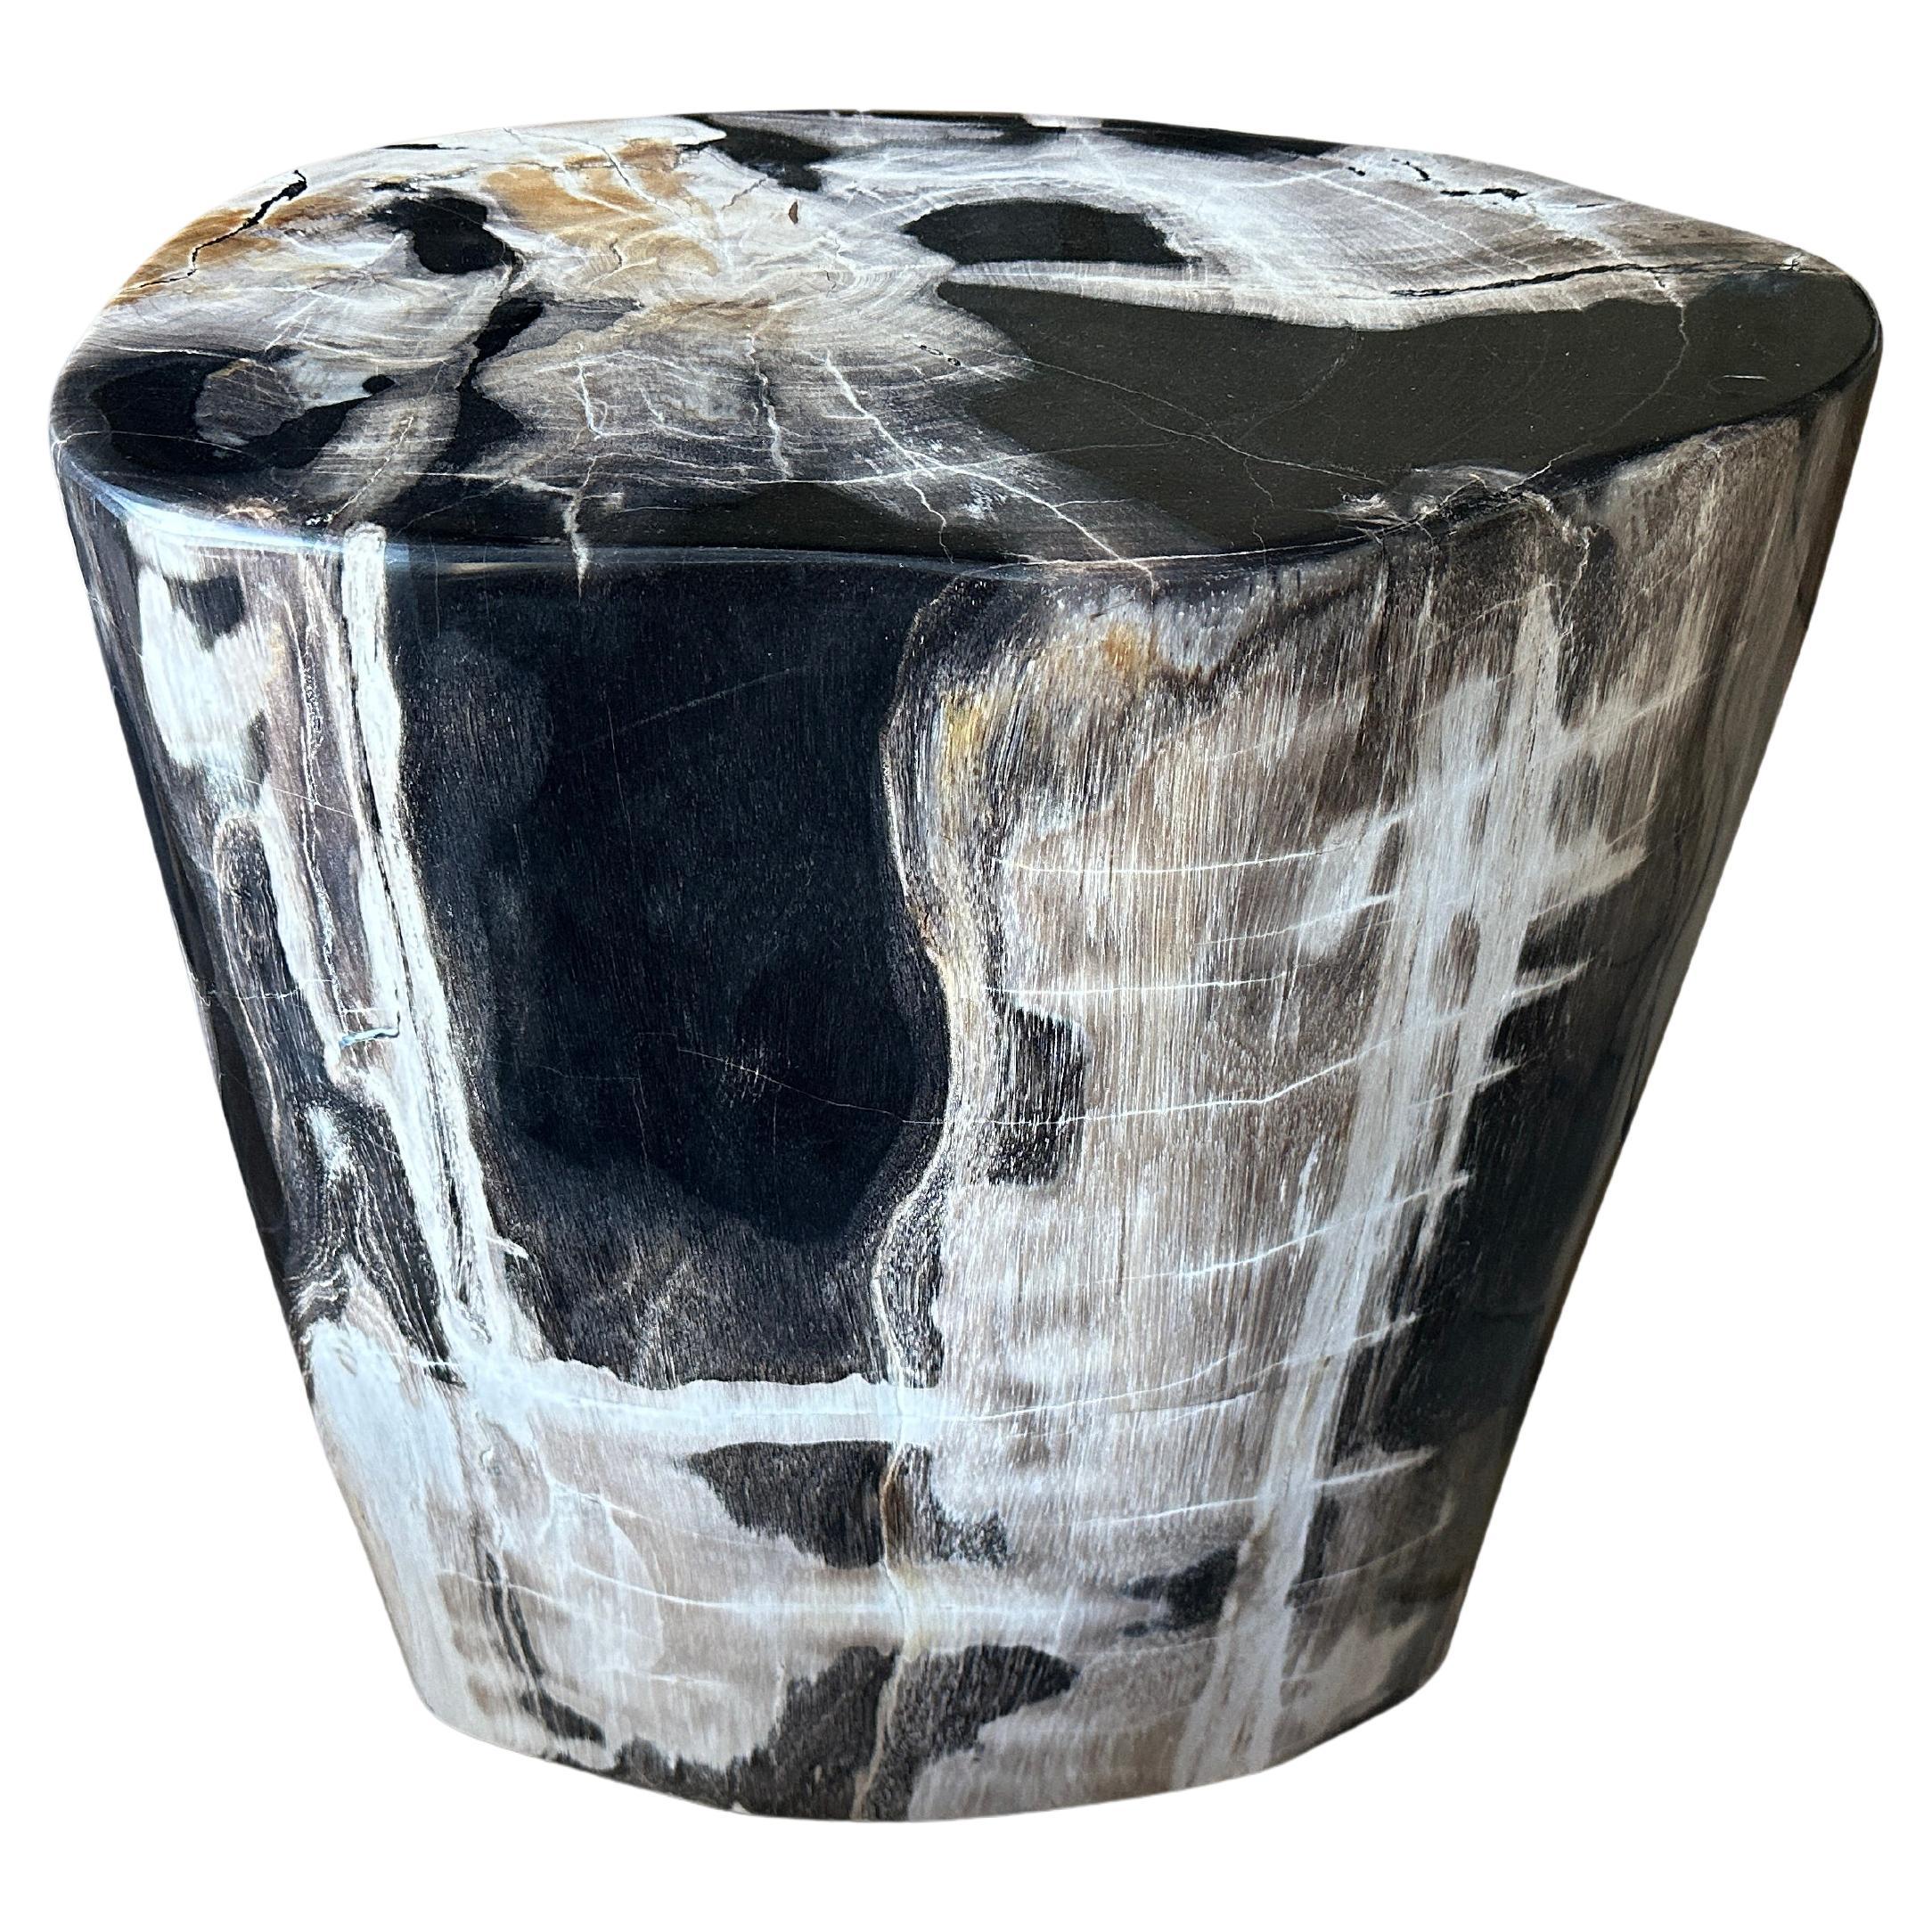 Andrianna Shamaris Super Smooth Black and White Tall Side Table or Pedestal For Sale